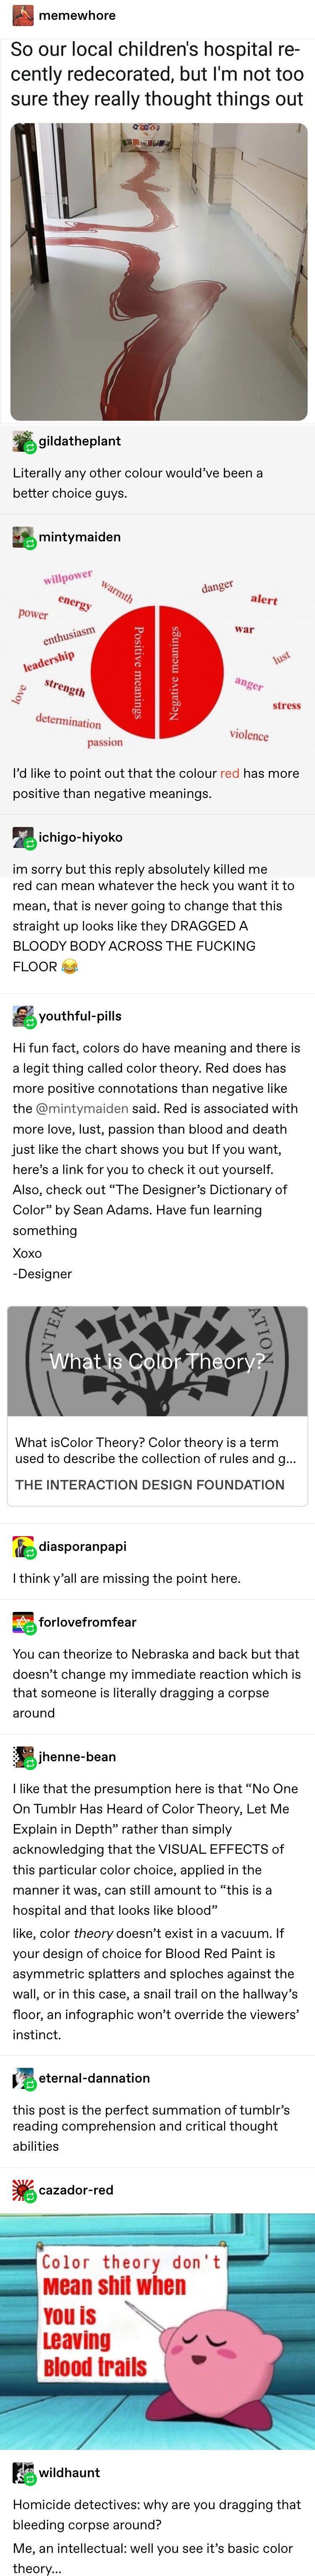 Understanding color theory.